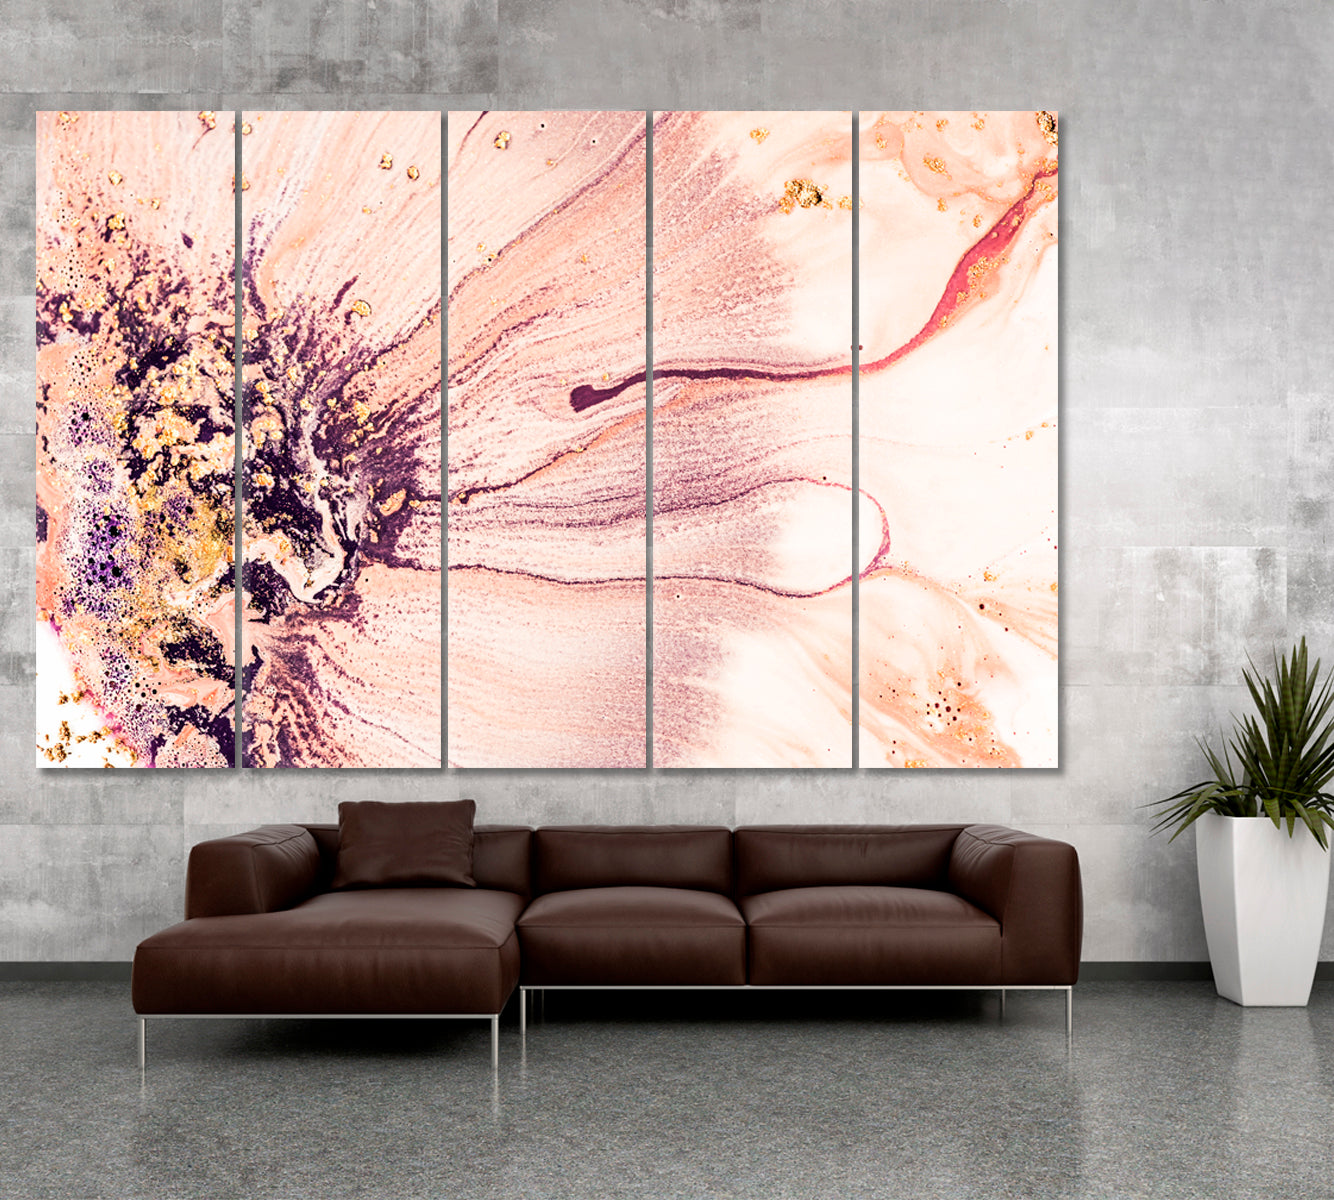 MARBLE Luxury Coral Colors Golden Powder Contemporary Fluid Art, Oriental Marbling Canvas Print Artesty 5 panels 36" x 24" 